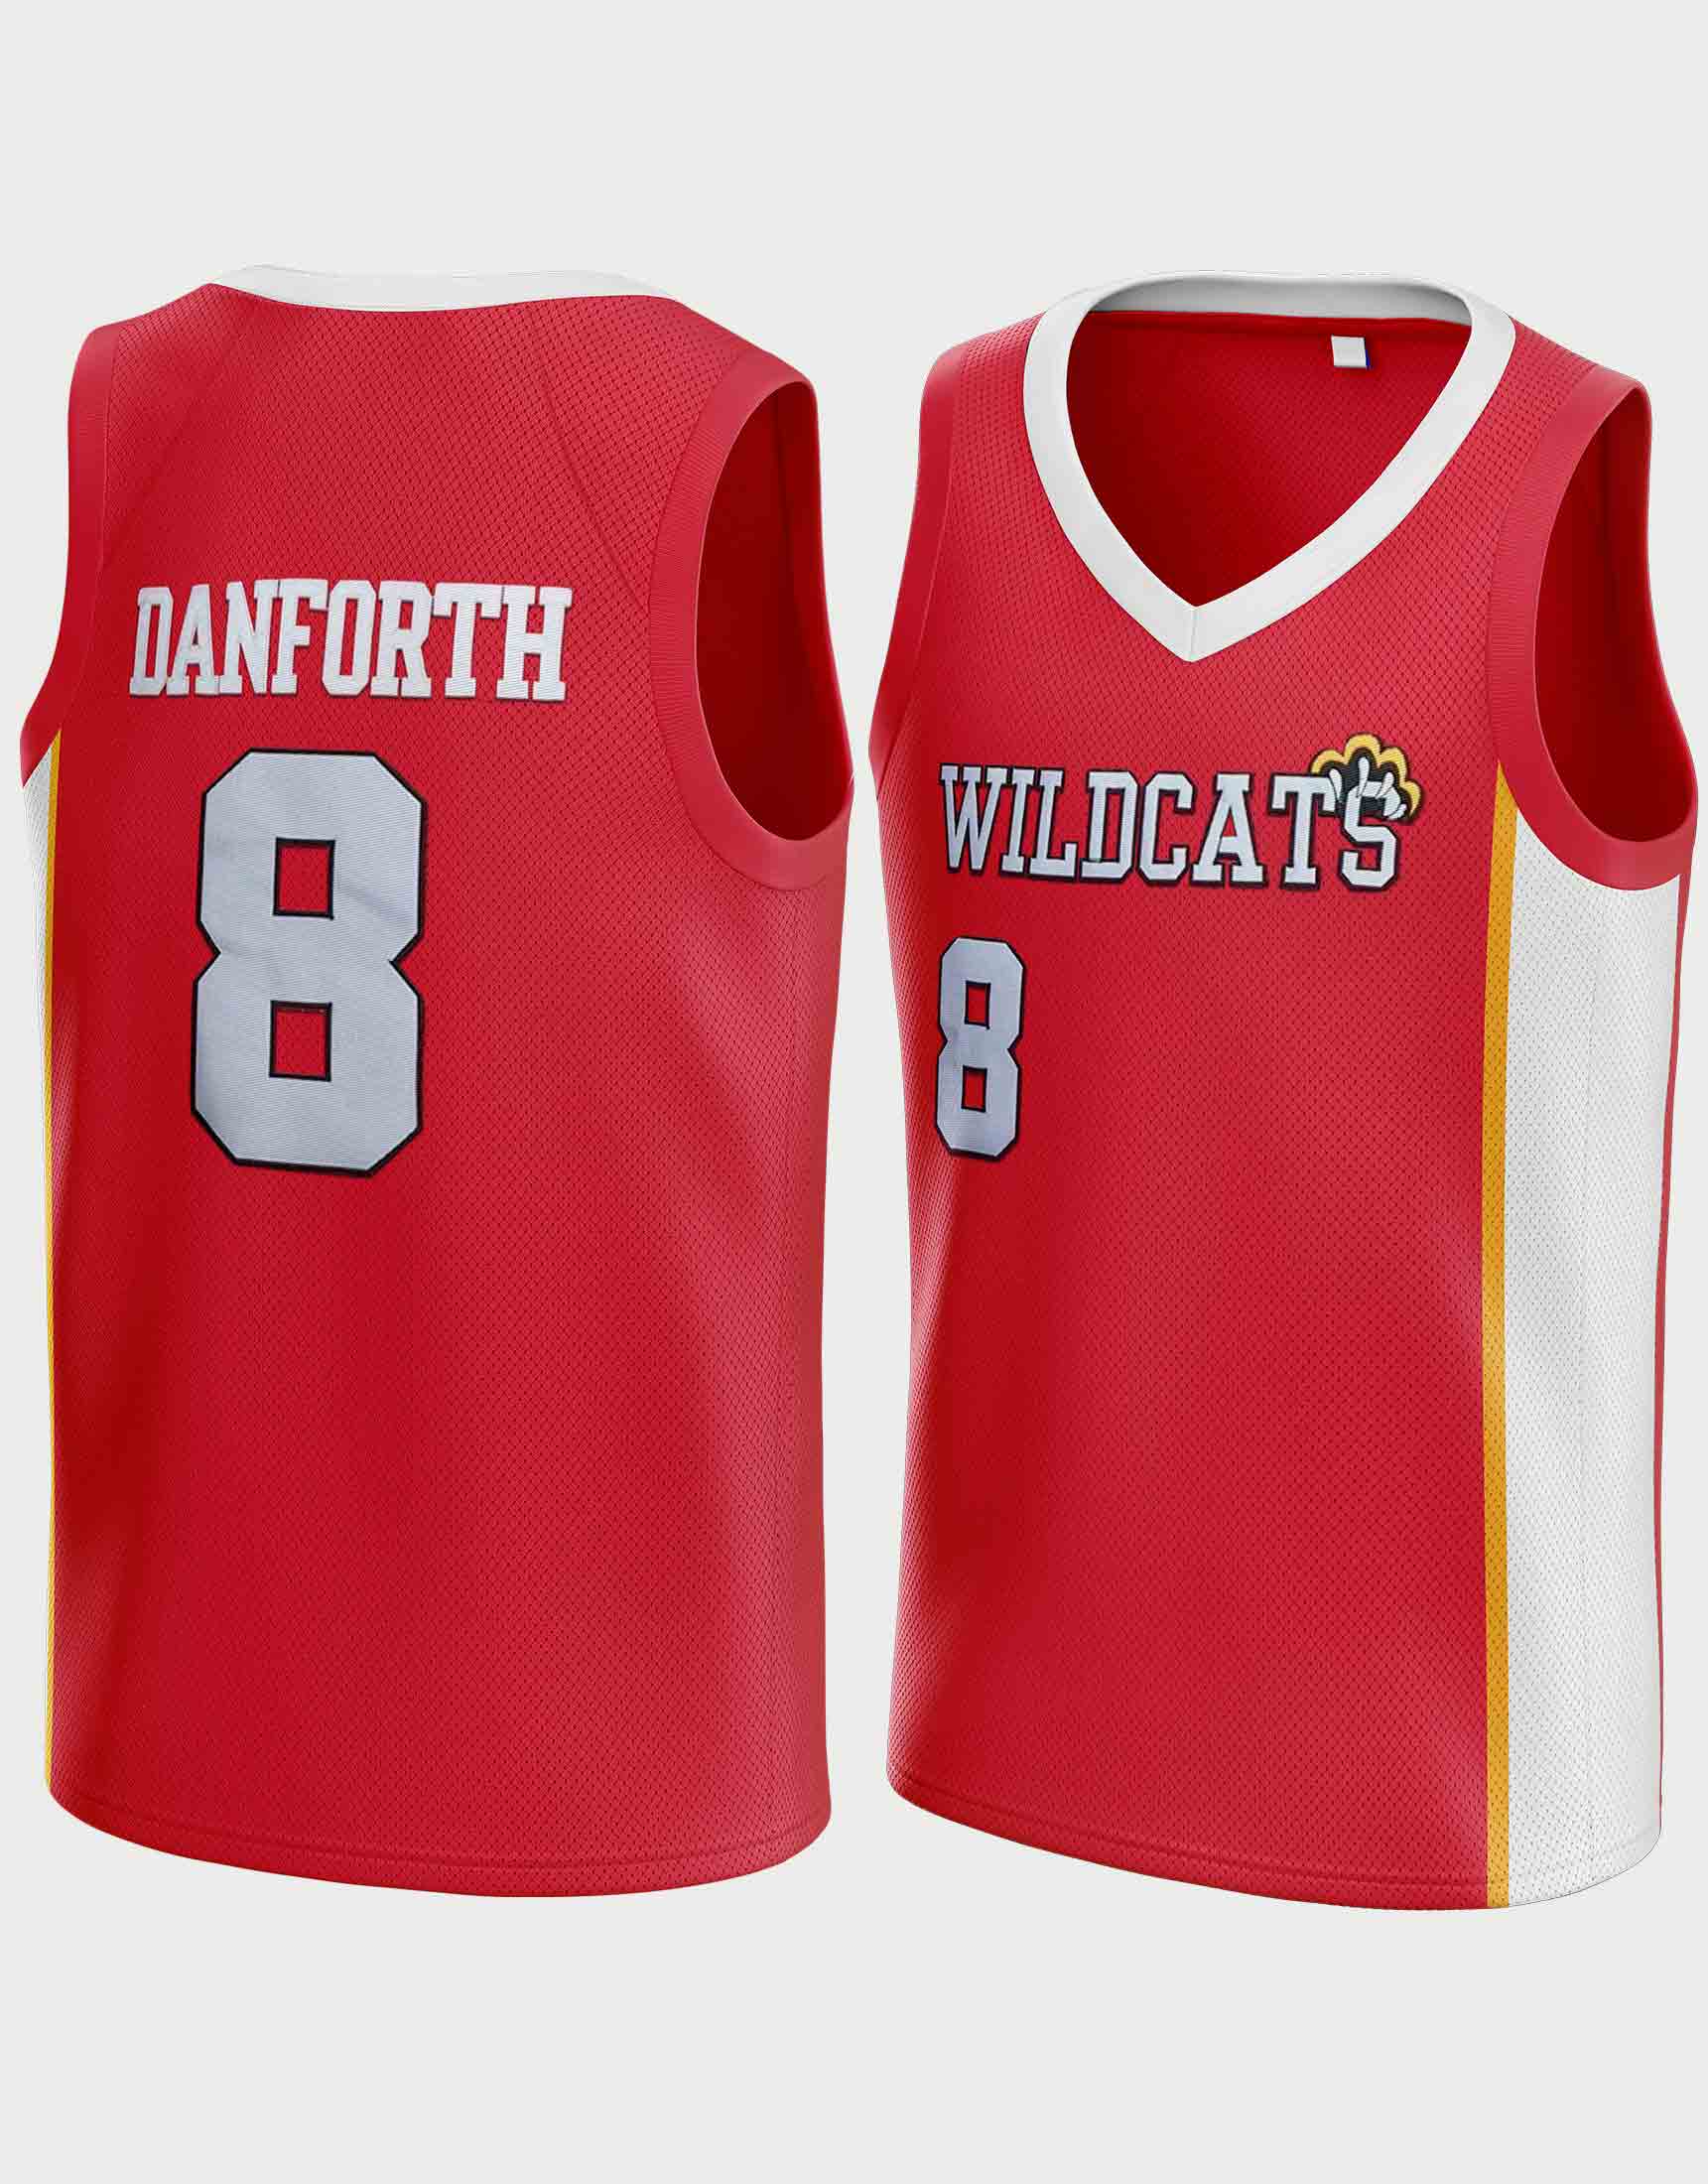 Chad Danforth #8 East Wildcats Basketball Jersey – 99Jersey®: Your Ultimate  Destination for Unique Jerseys, Shorts, and More